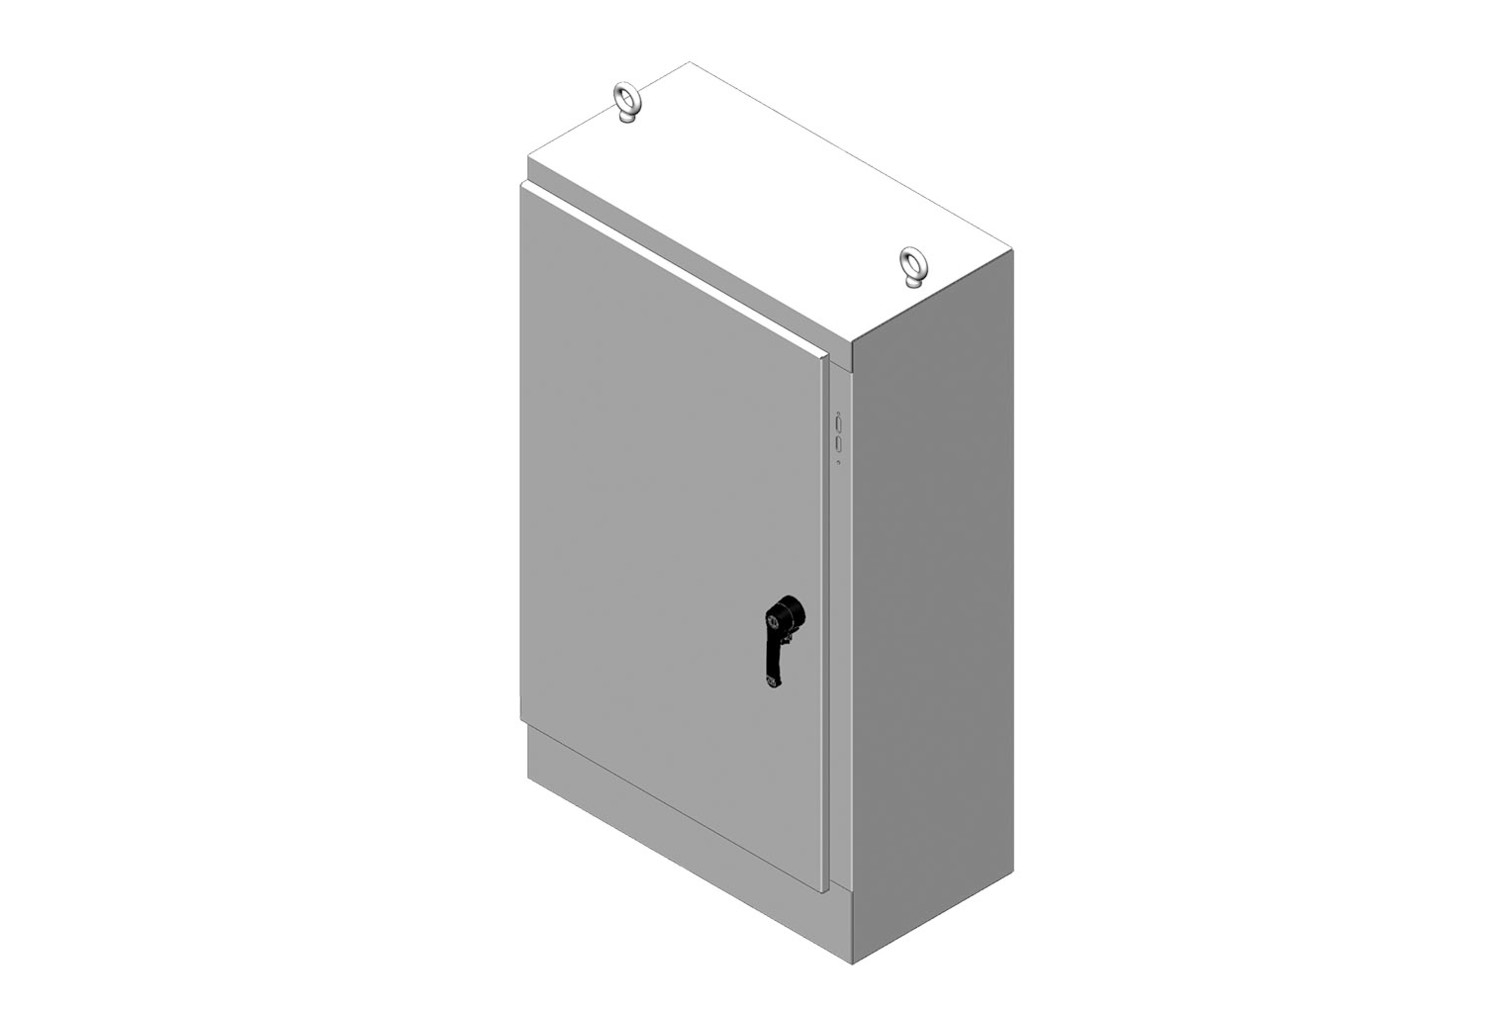 RMR Free-Standing Disconnect Enclosure, Type 4, with Solid Single Door - Image 2